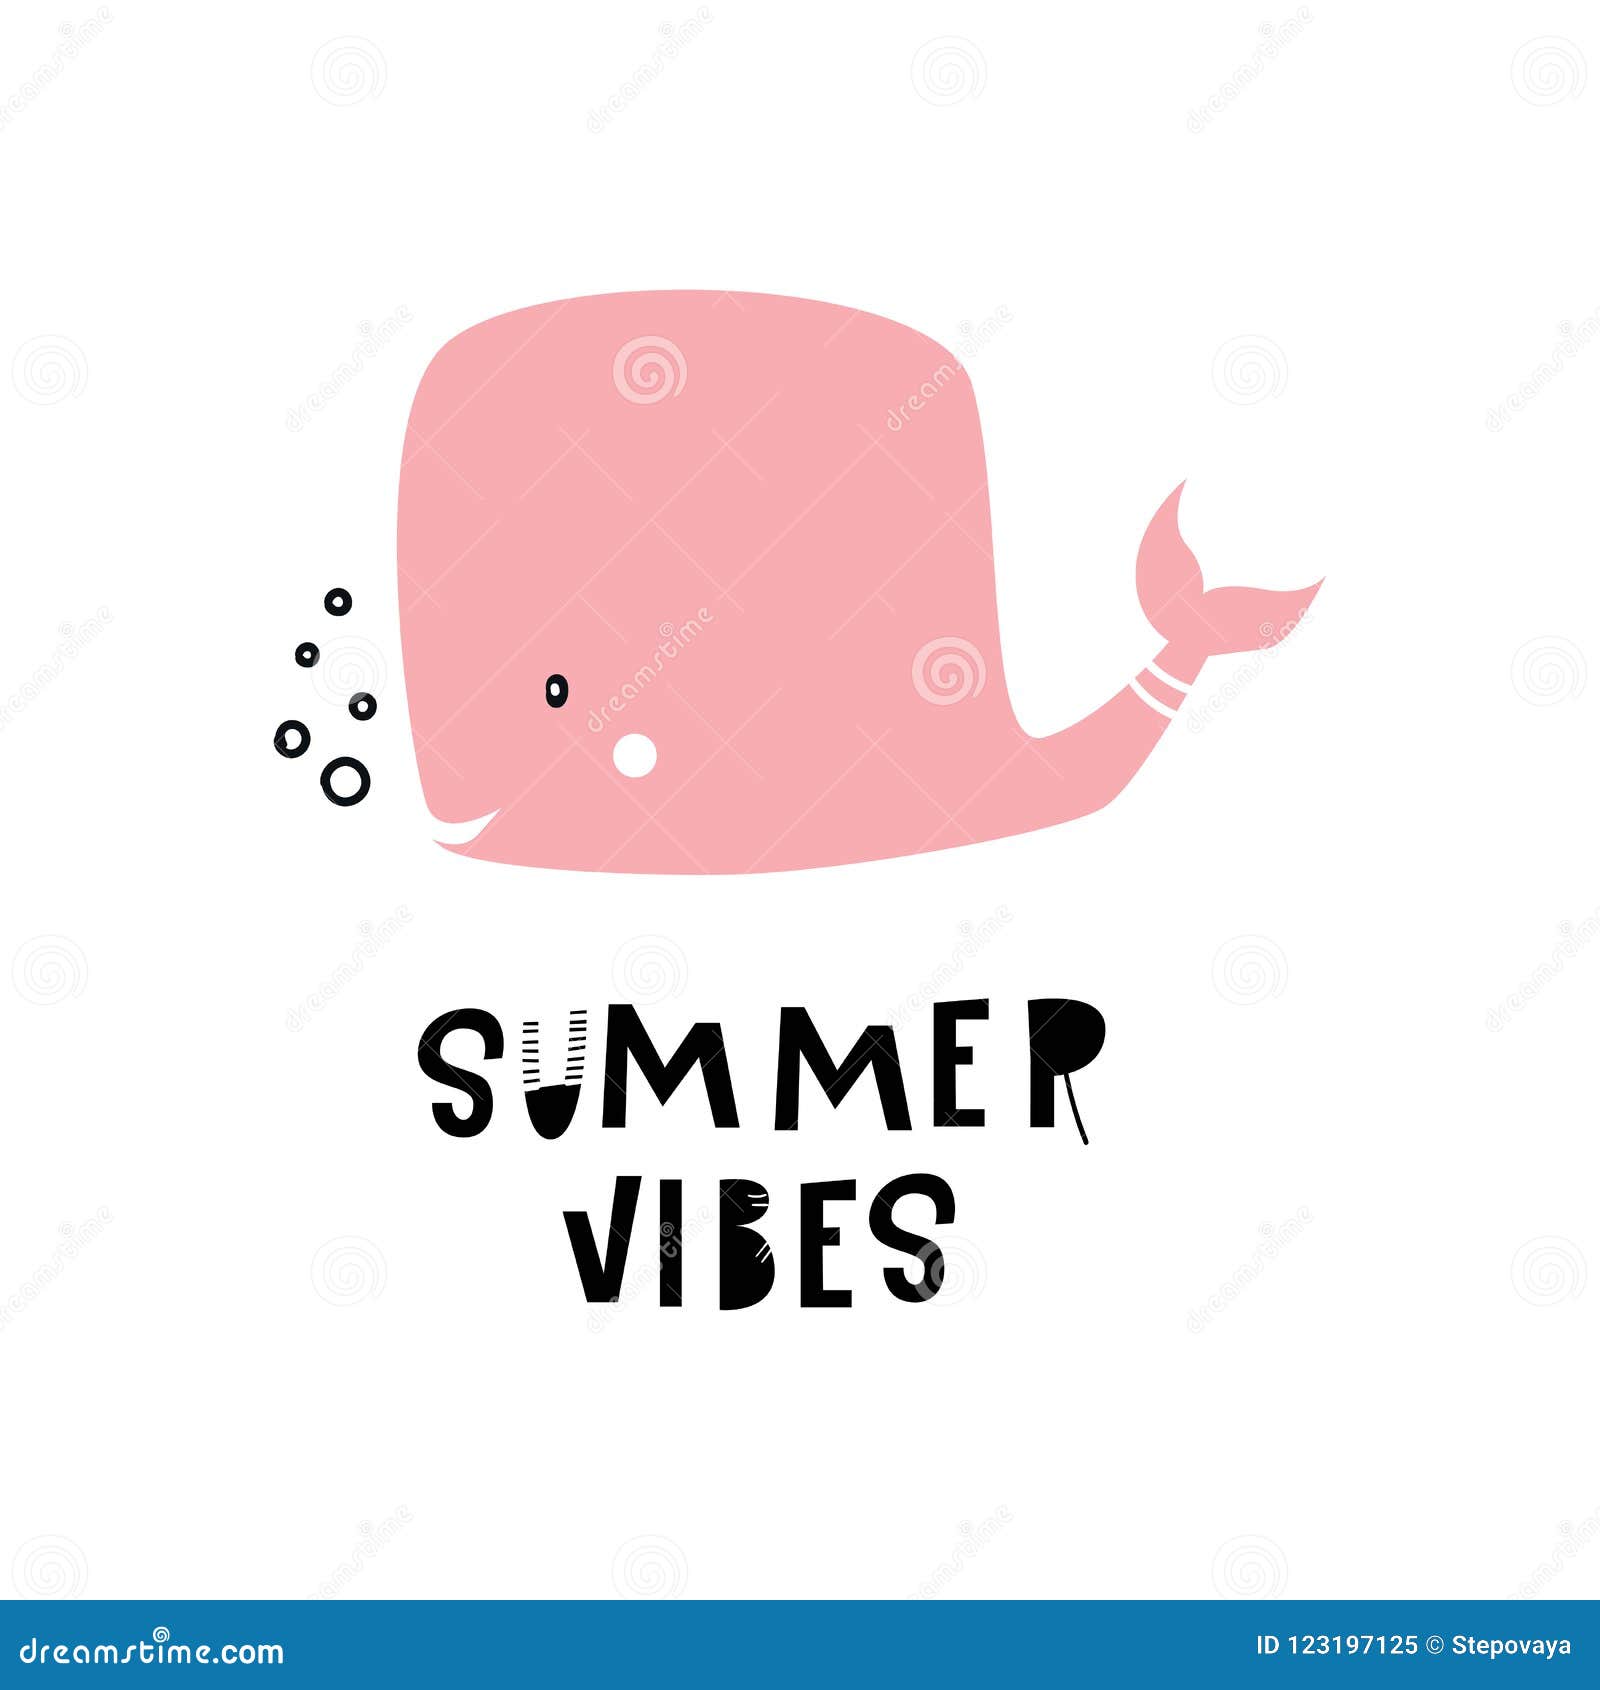 Summer Vibes - Cute Hand Drawn Nursery Poster with Cartoon Whale and  Lettering. Stock Illustration - Illustration of element, phrase: 123197125